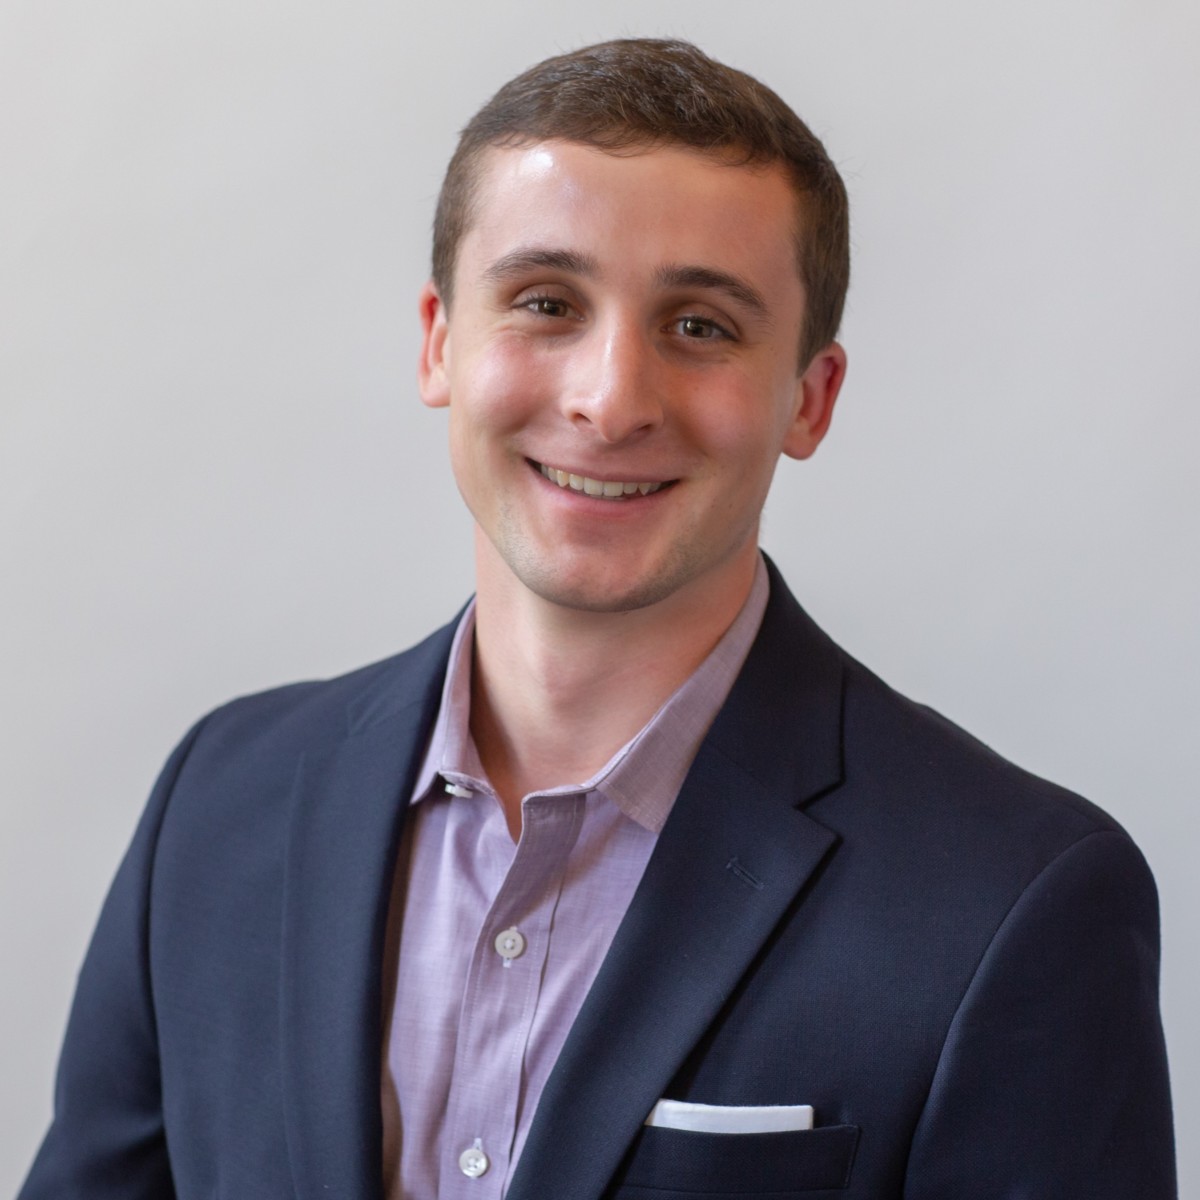 Jake Scearbo, Account Manager at Corporate Ink, a Boston PR agency for B2B Tech companies.